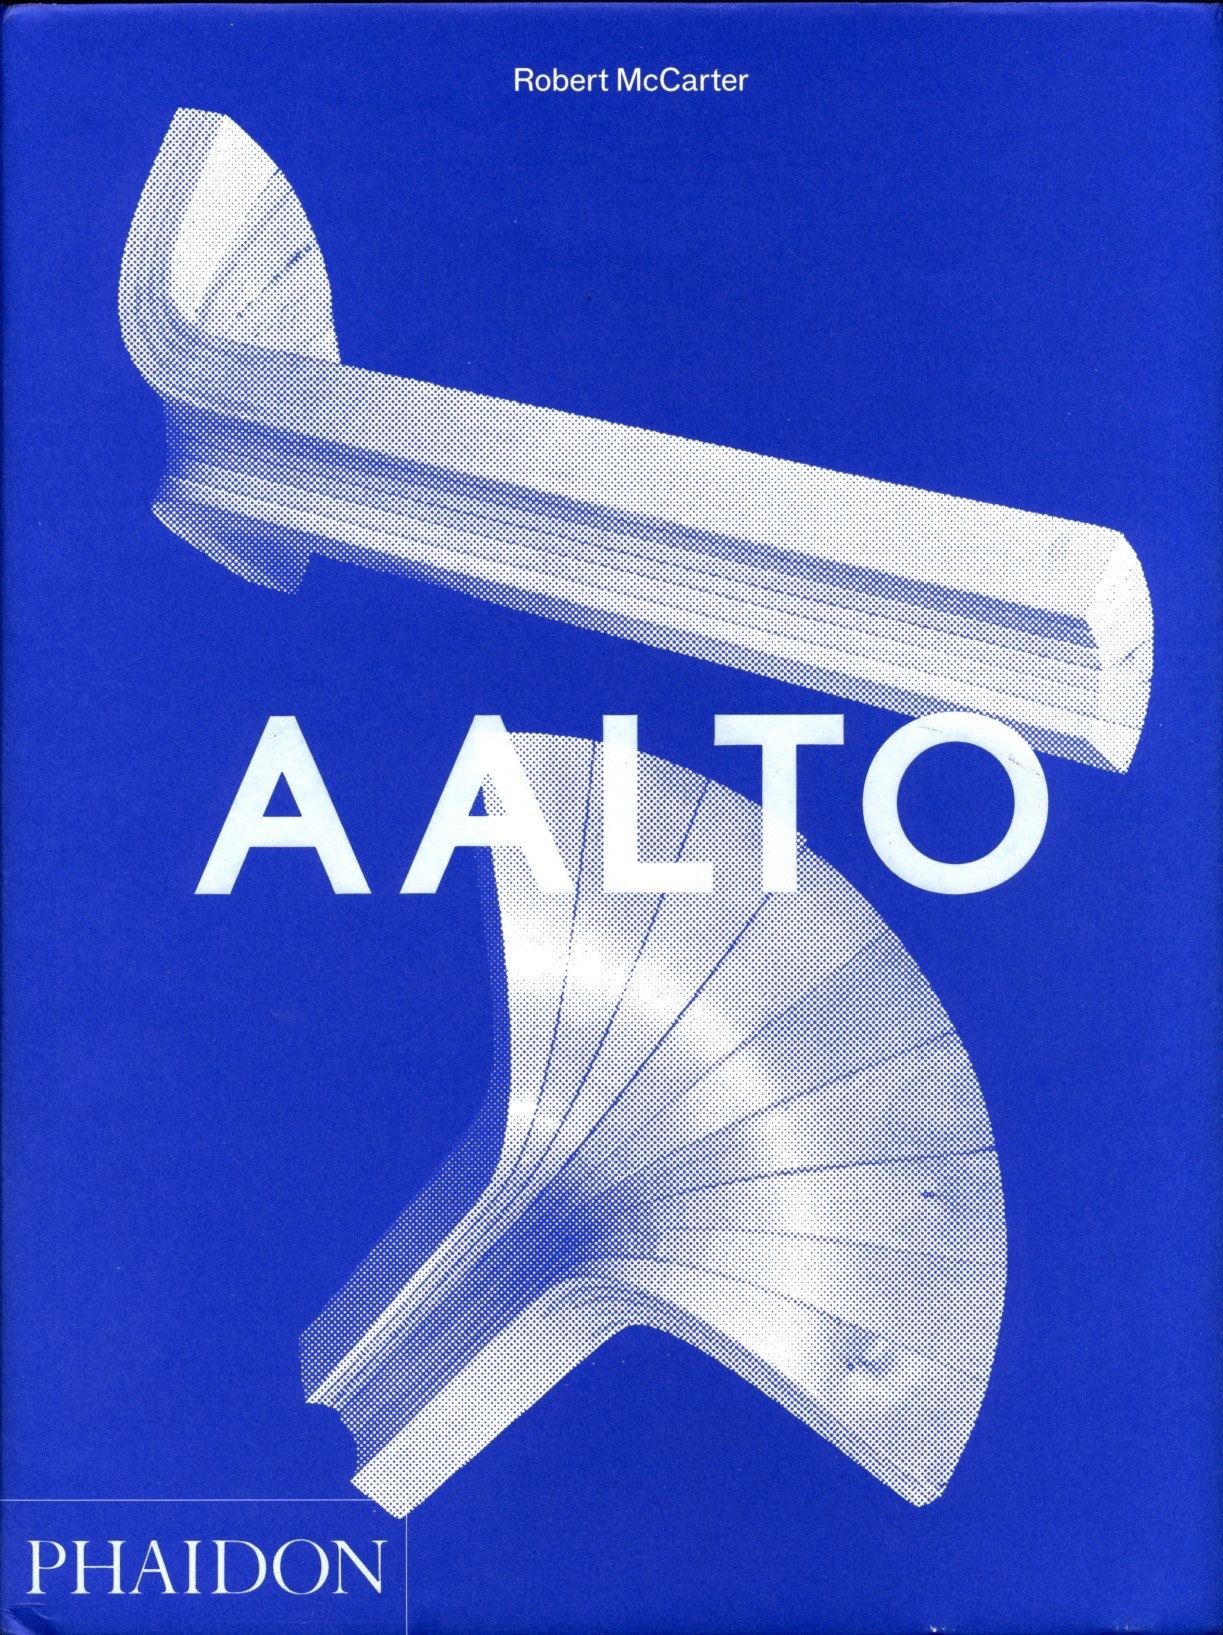 Cover of Aalto, with a bright royal blue background and white type plus two white objects with curved surfaces.